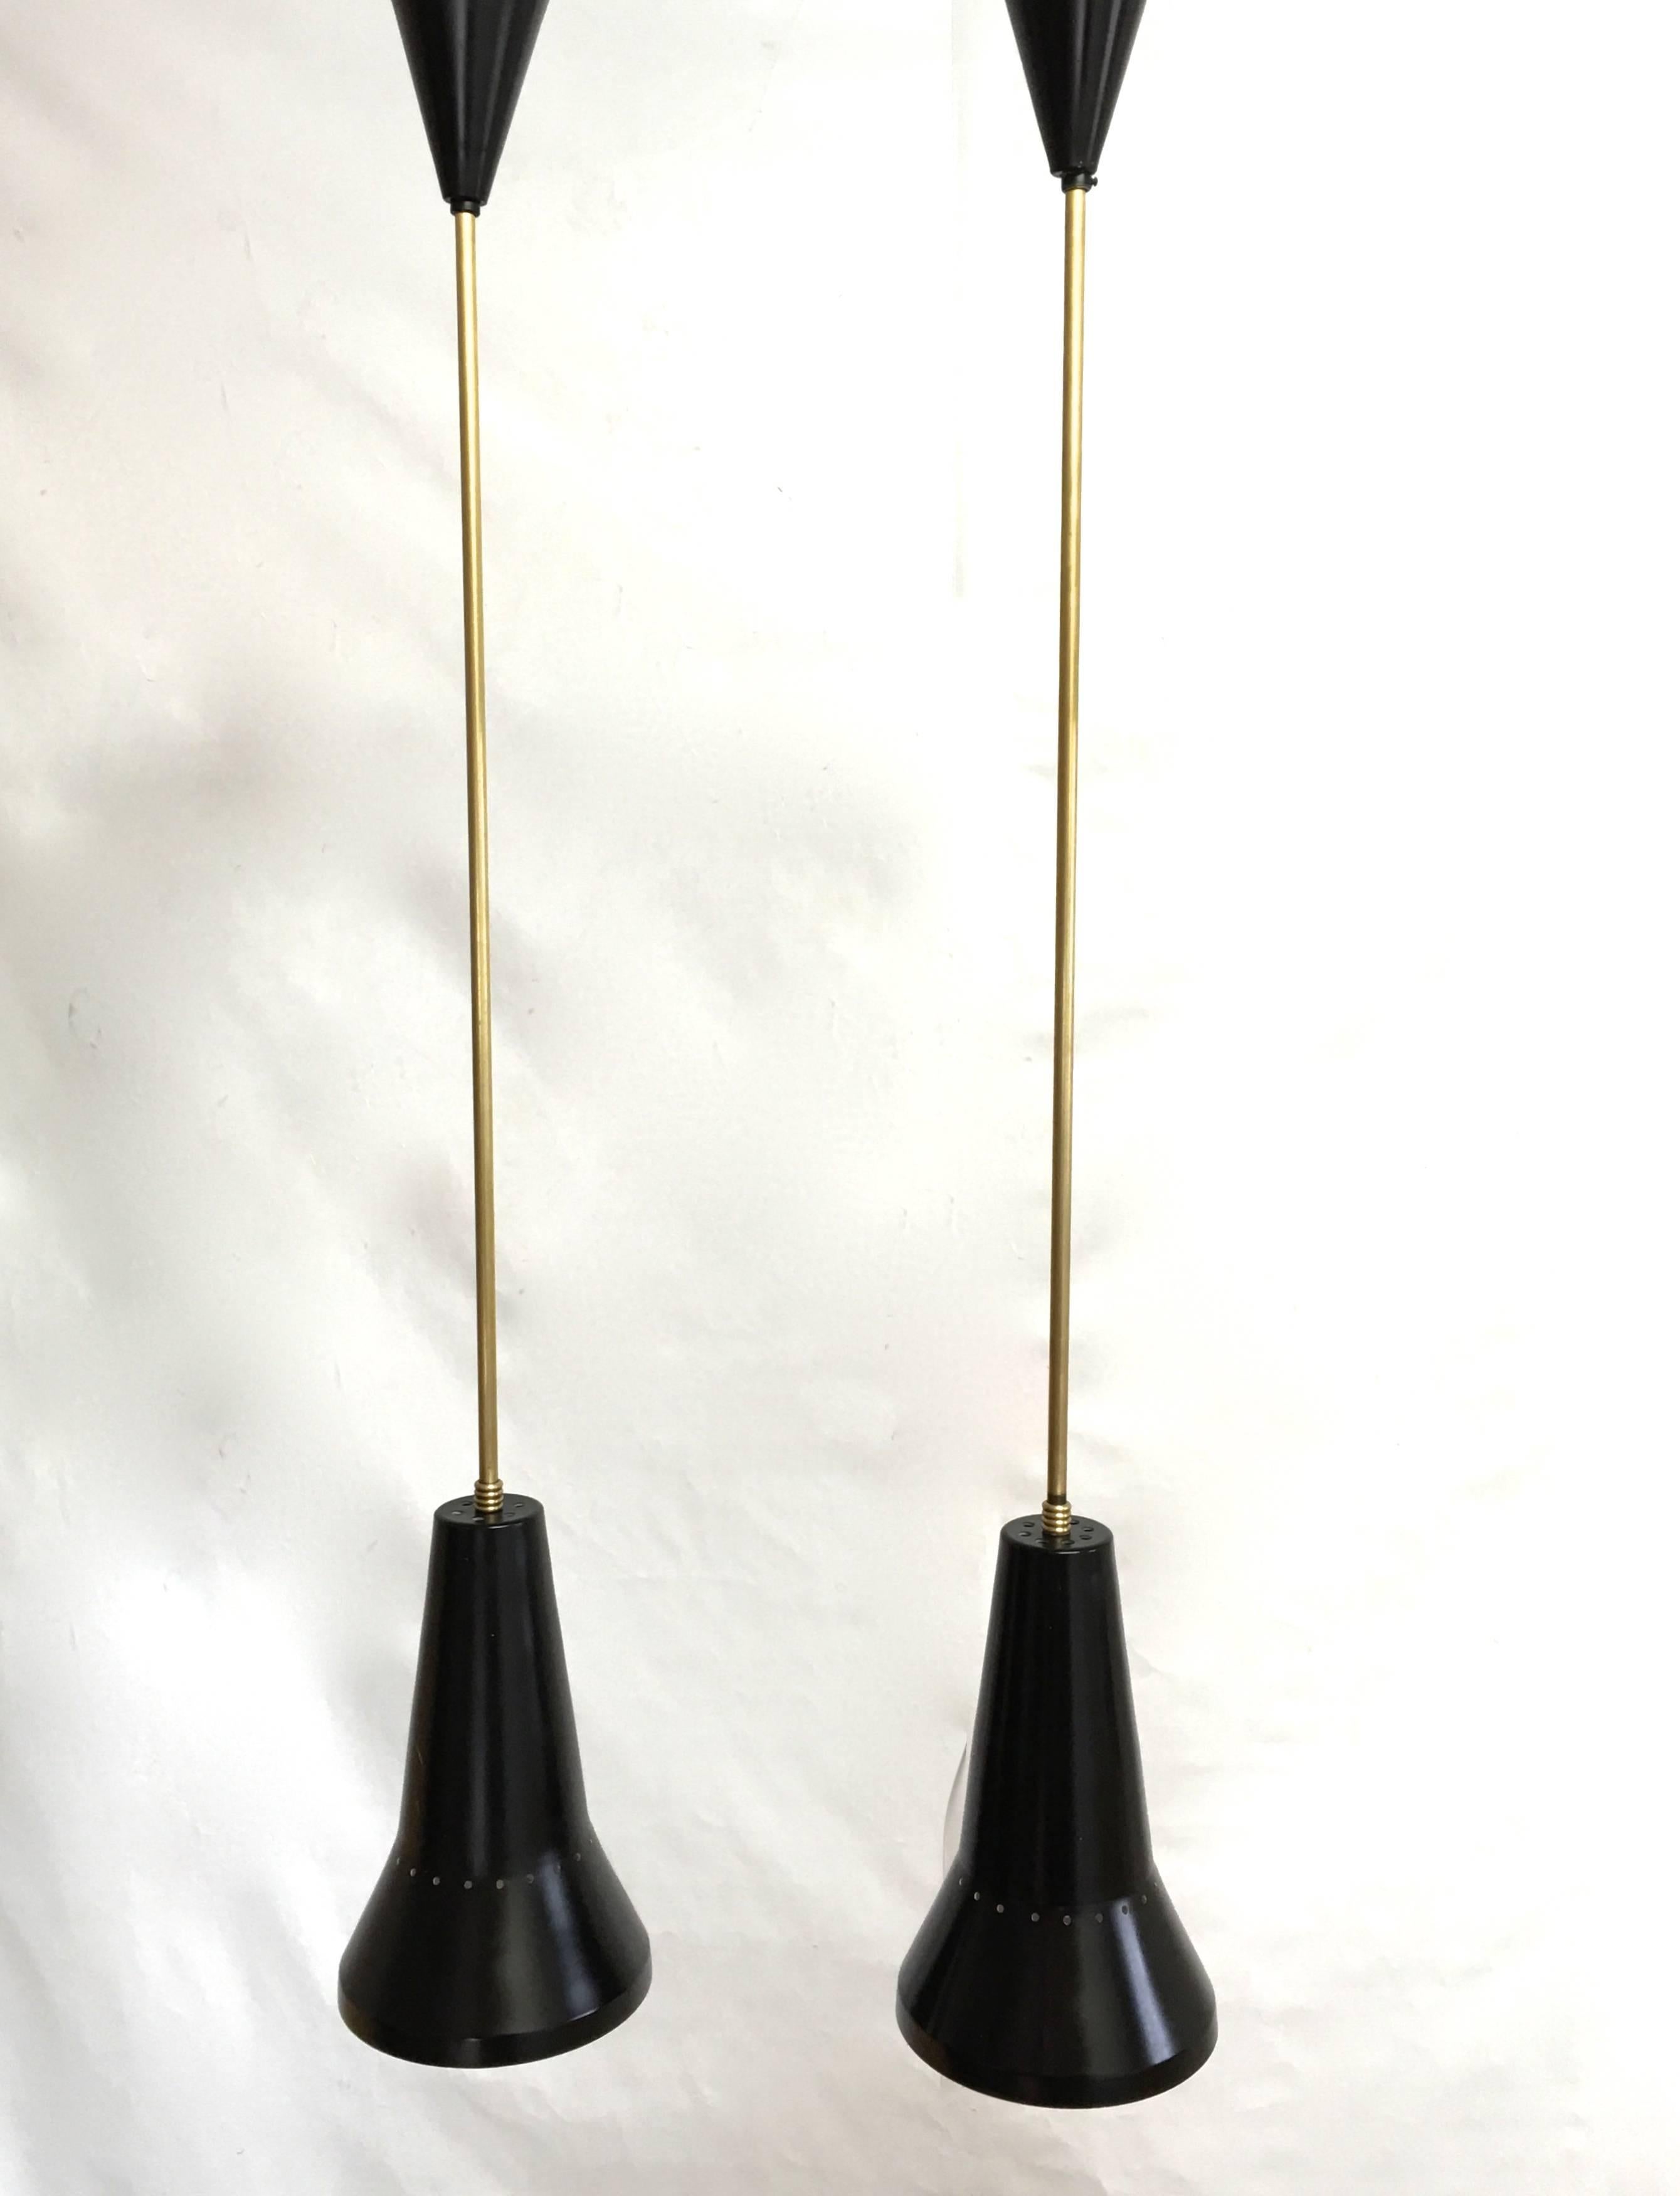 Two long stemmed pendants with black sconce and black ceiling rose in midcentury Minimalist design.
                 